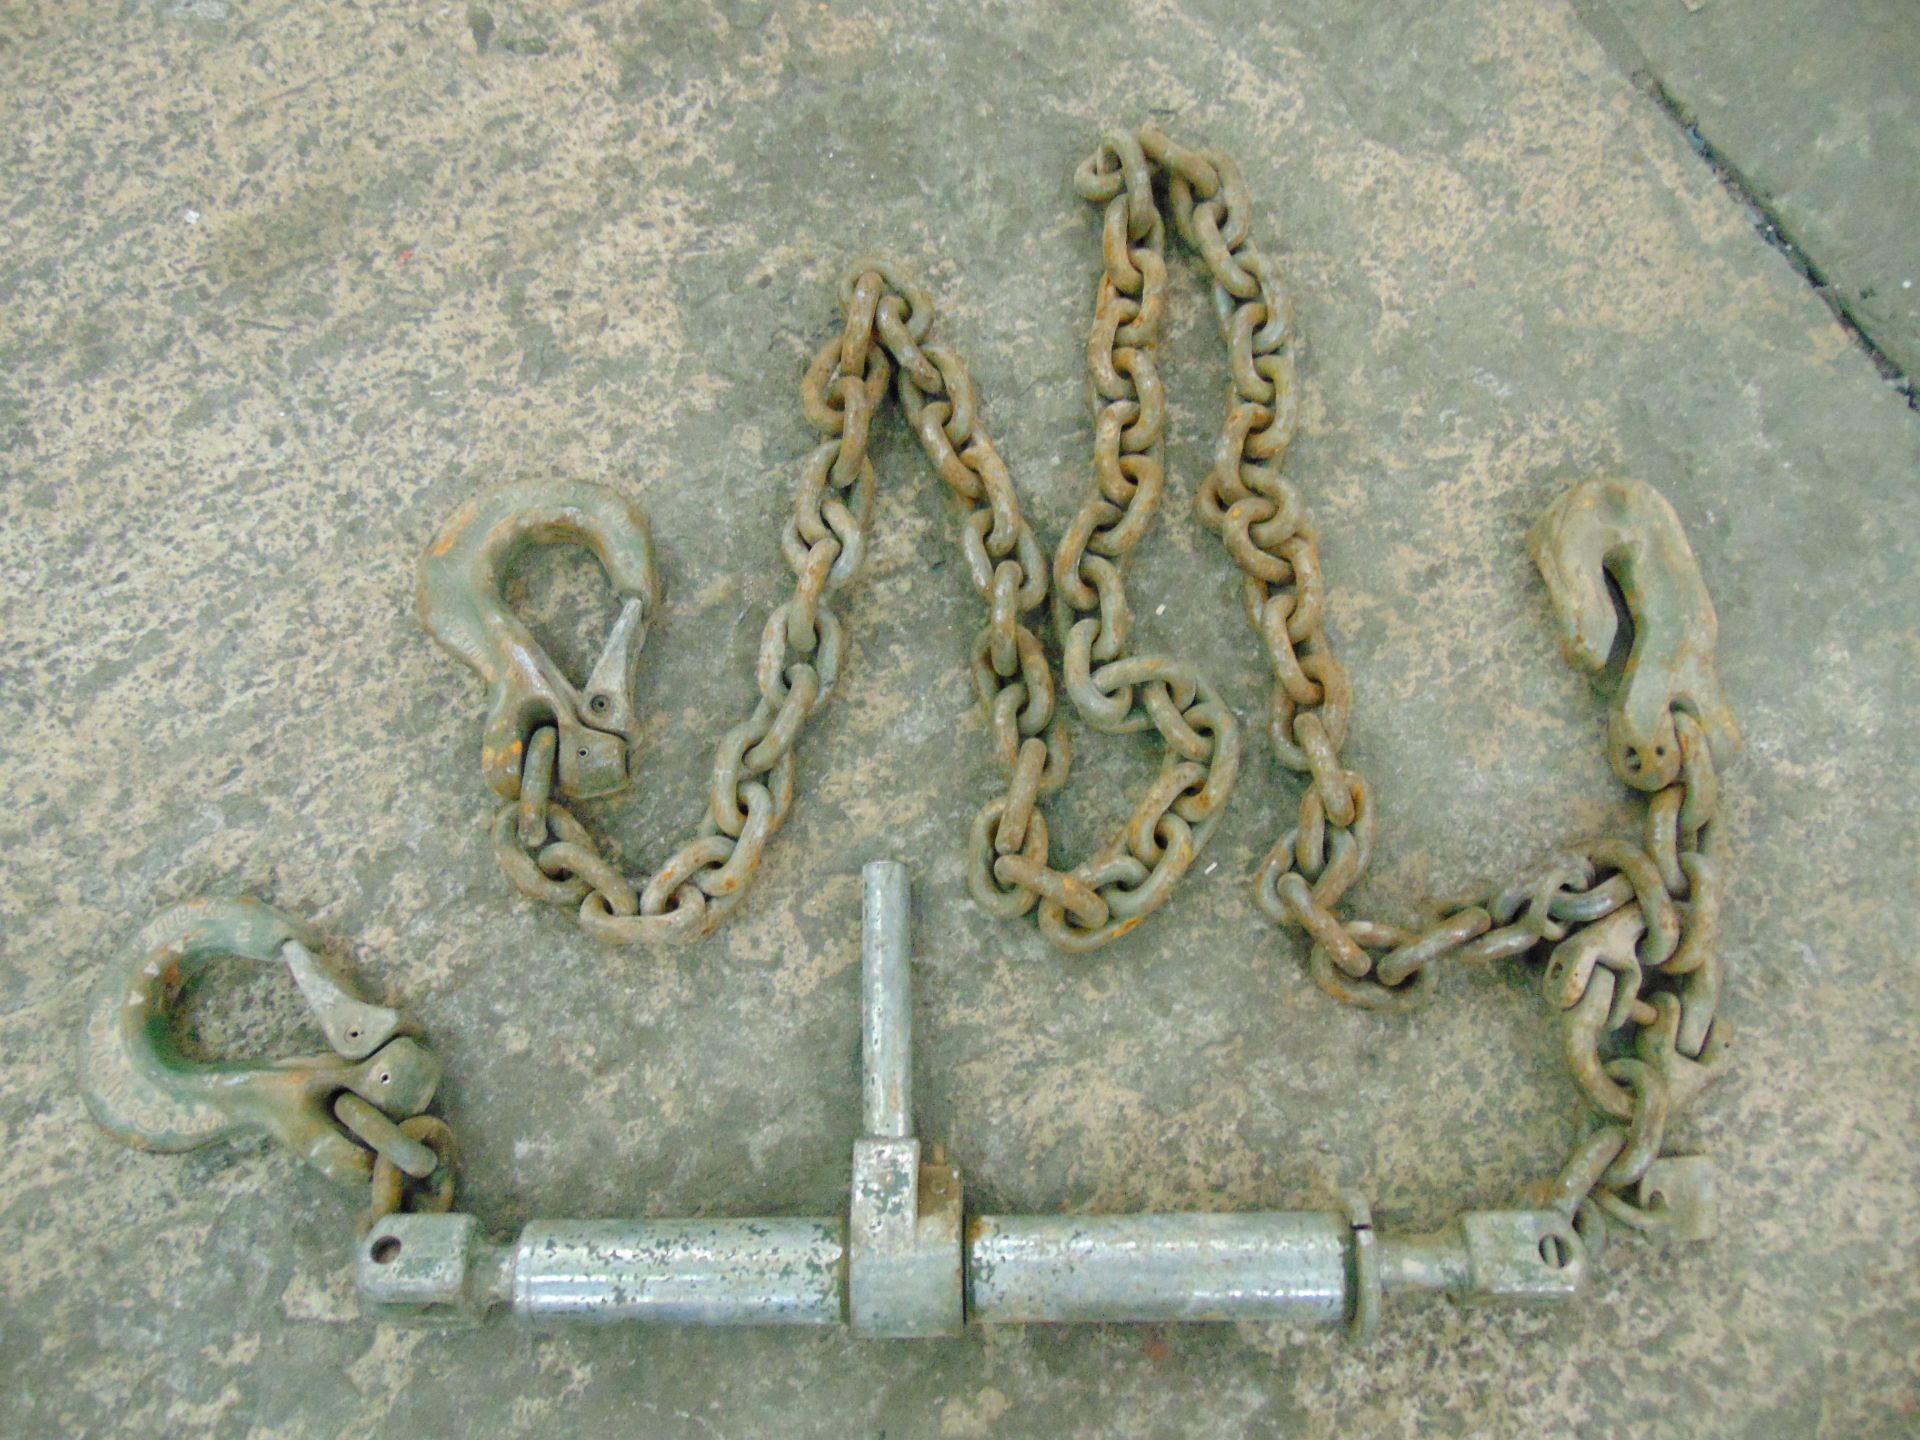 Very Heavy Duty RUD Lashing Chain with Ratchet Tensioner